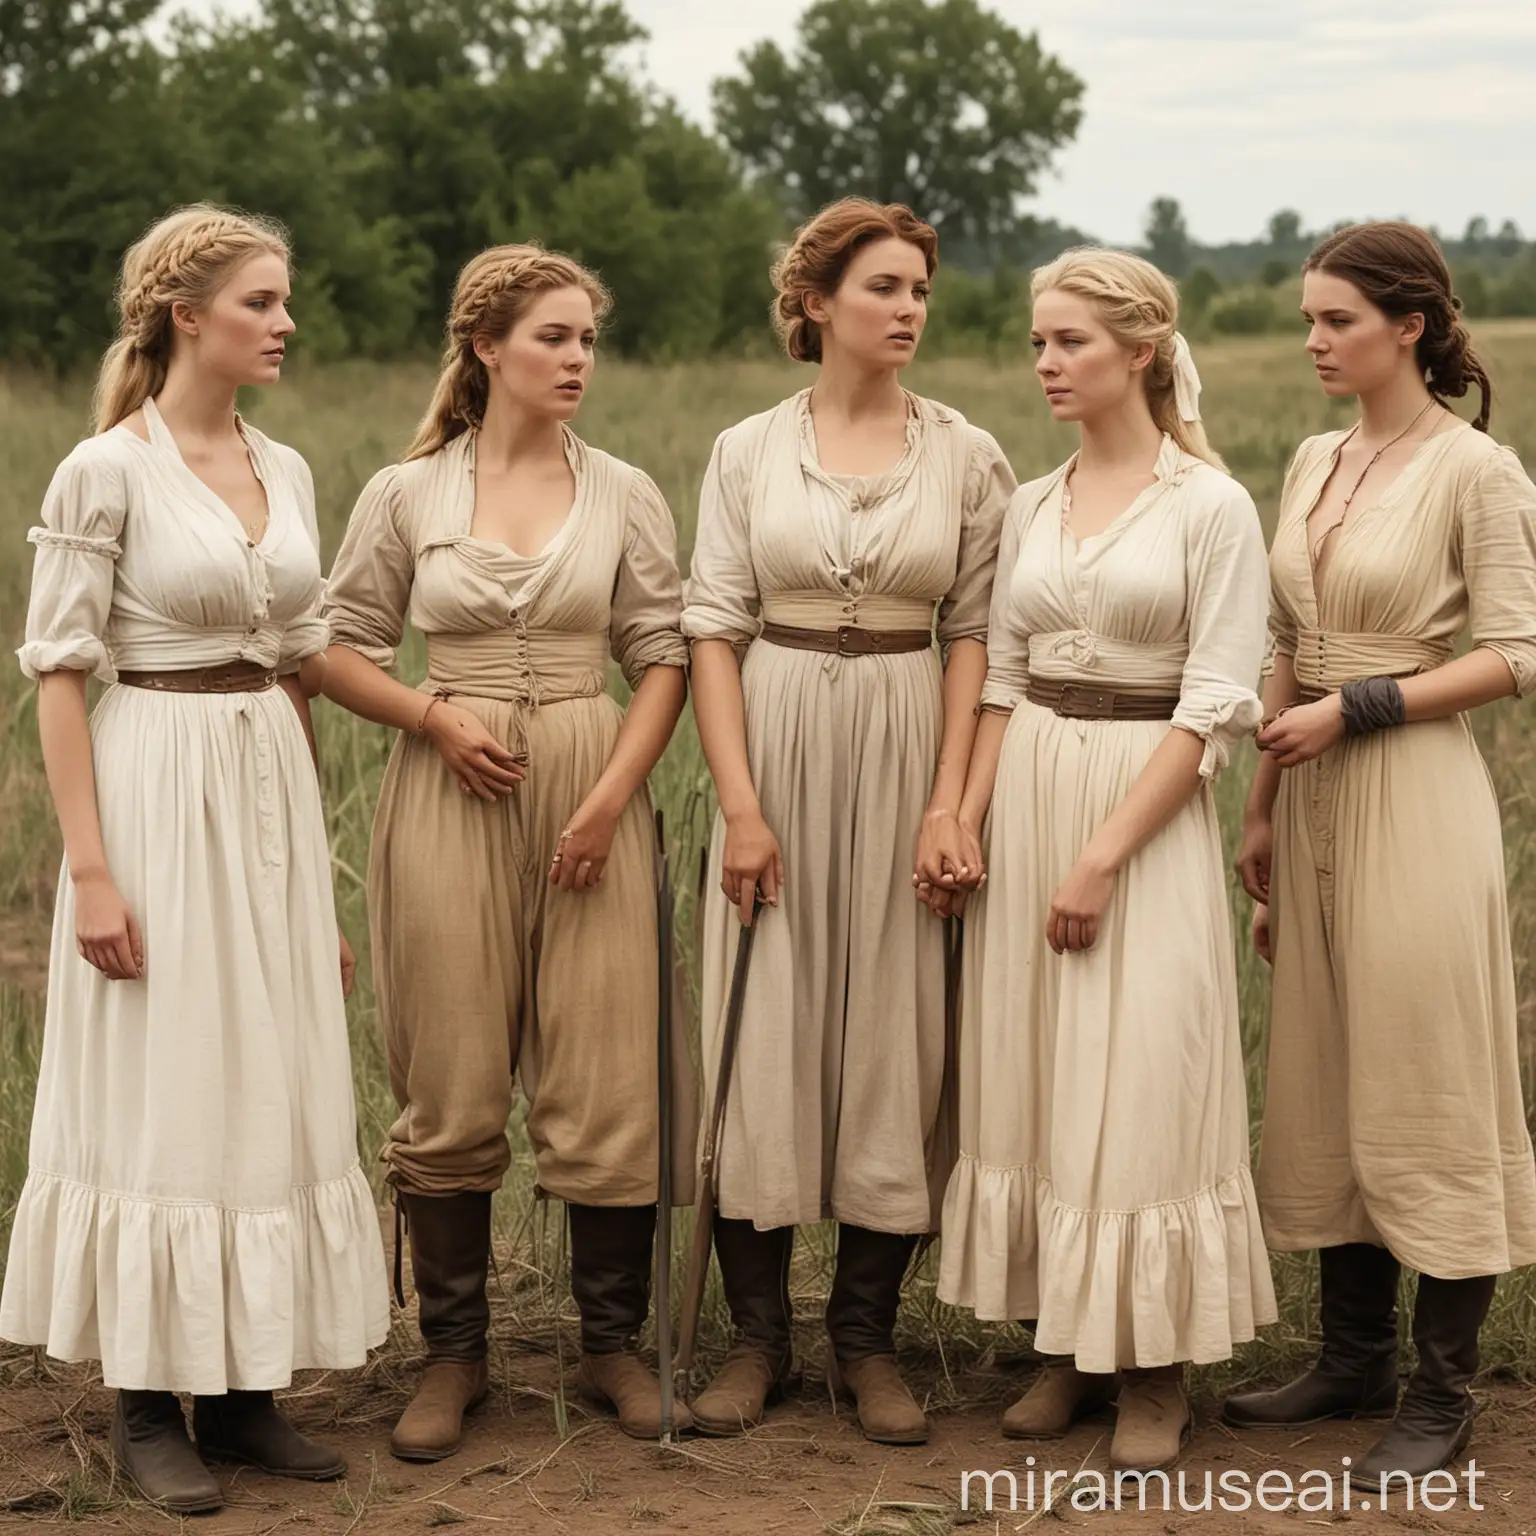 Group of white women being actioned as slaves, prairie, 1800s, color, sexy